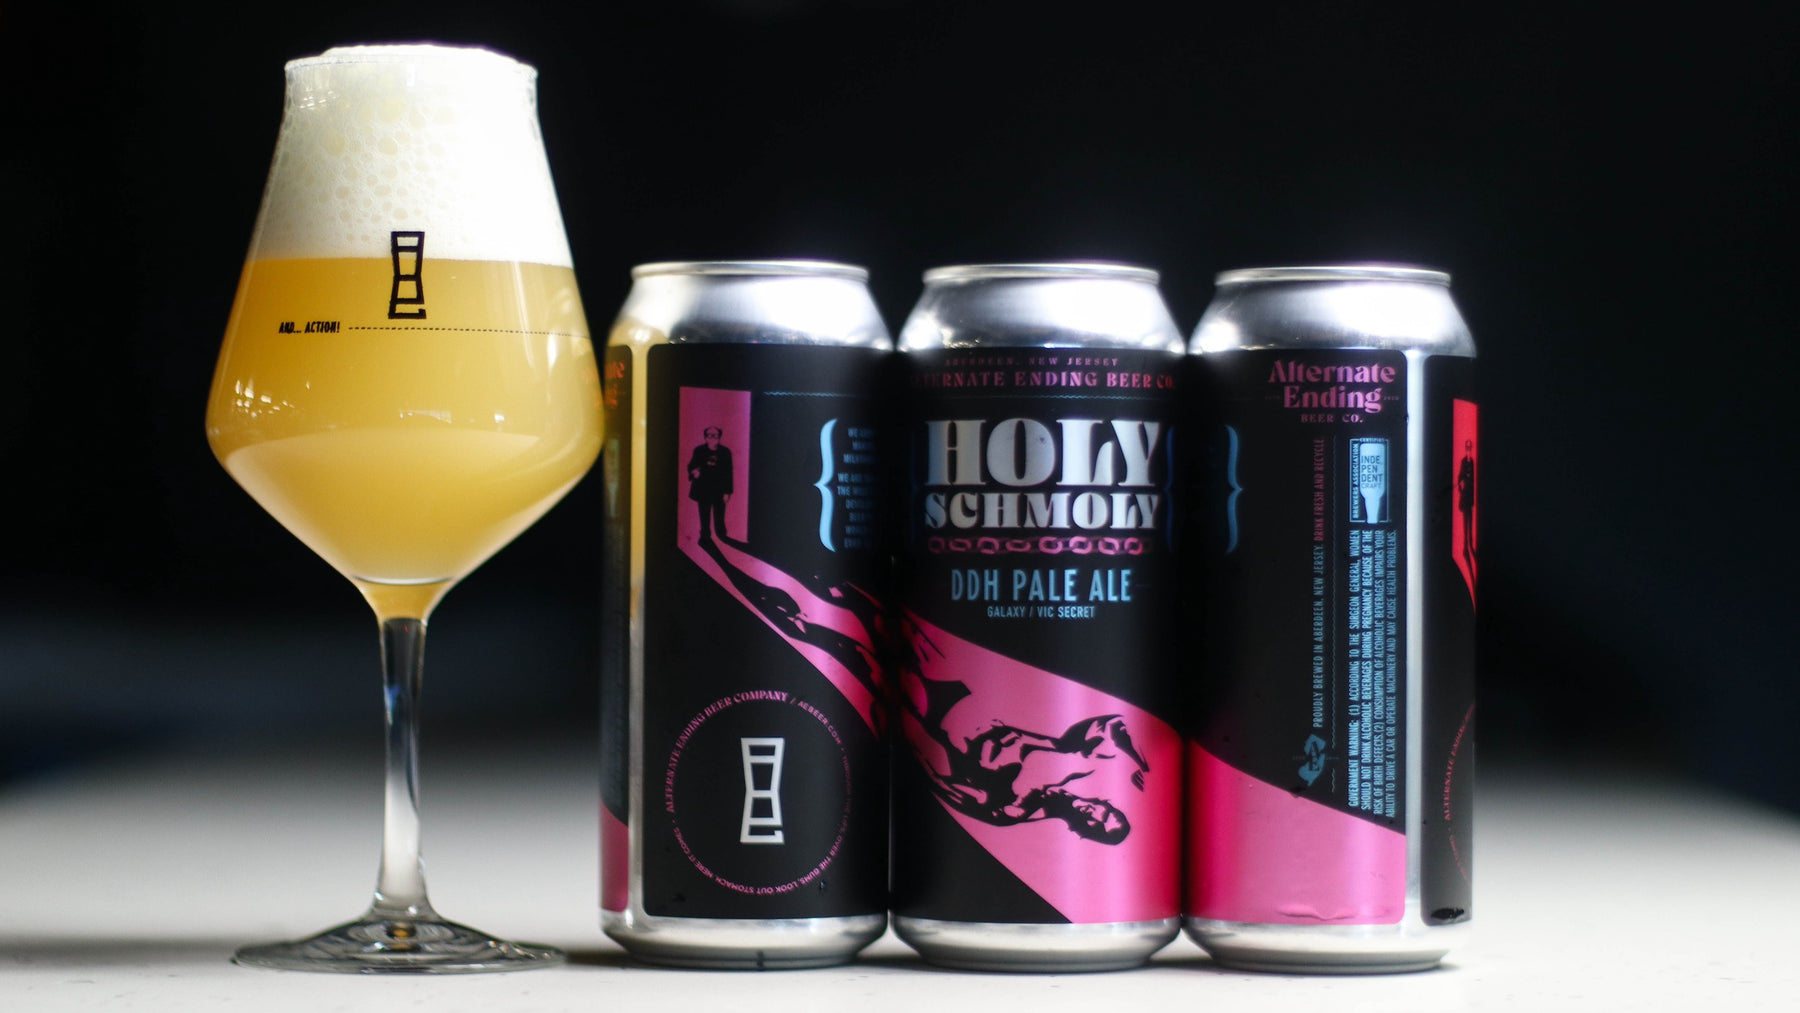 Alternate Ending Beer Co. Holy Schmoly DDH Pale Ale 6.1%